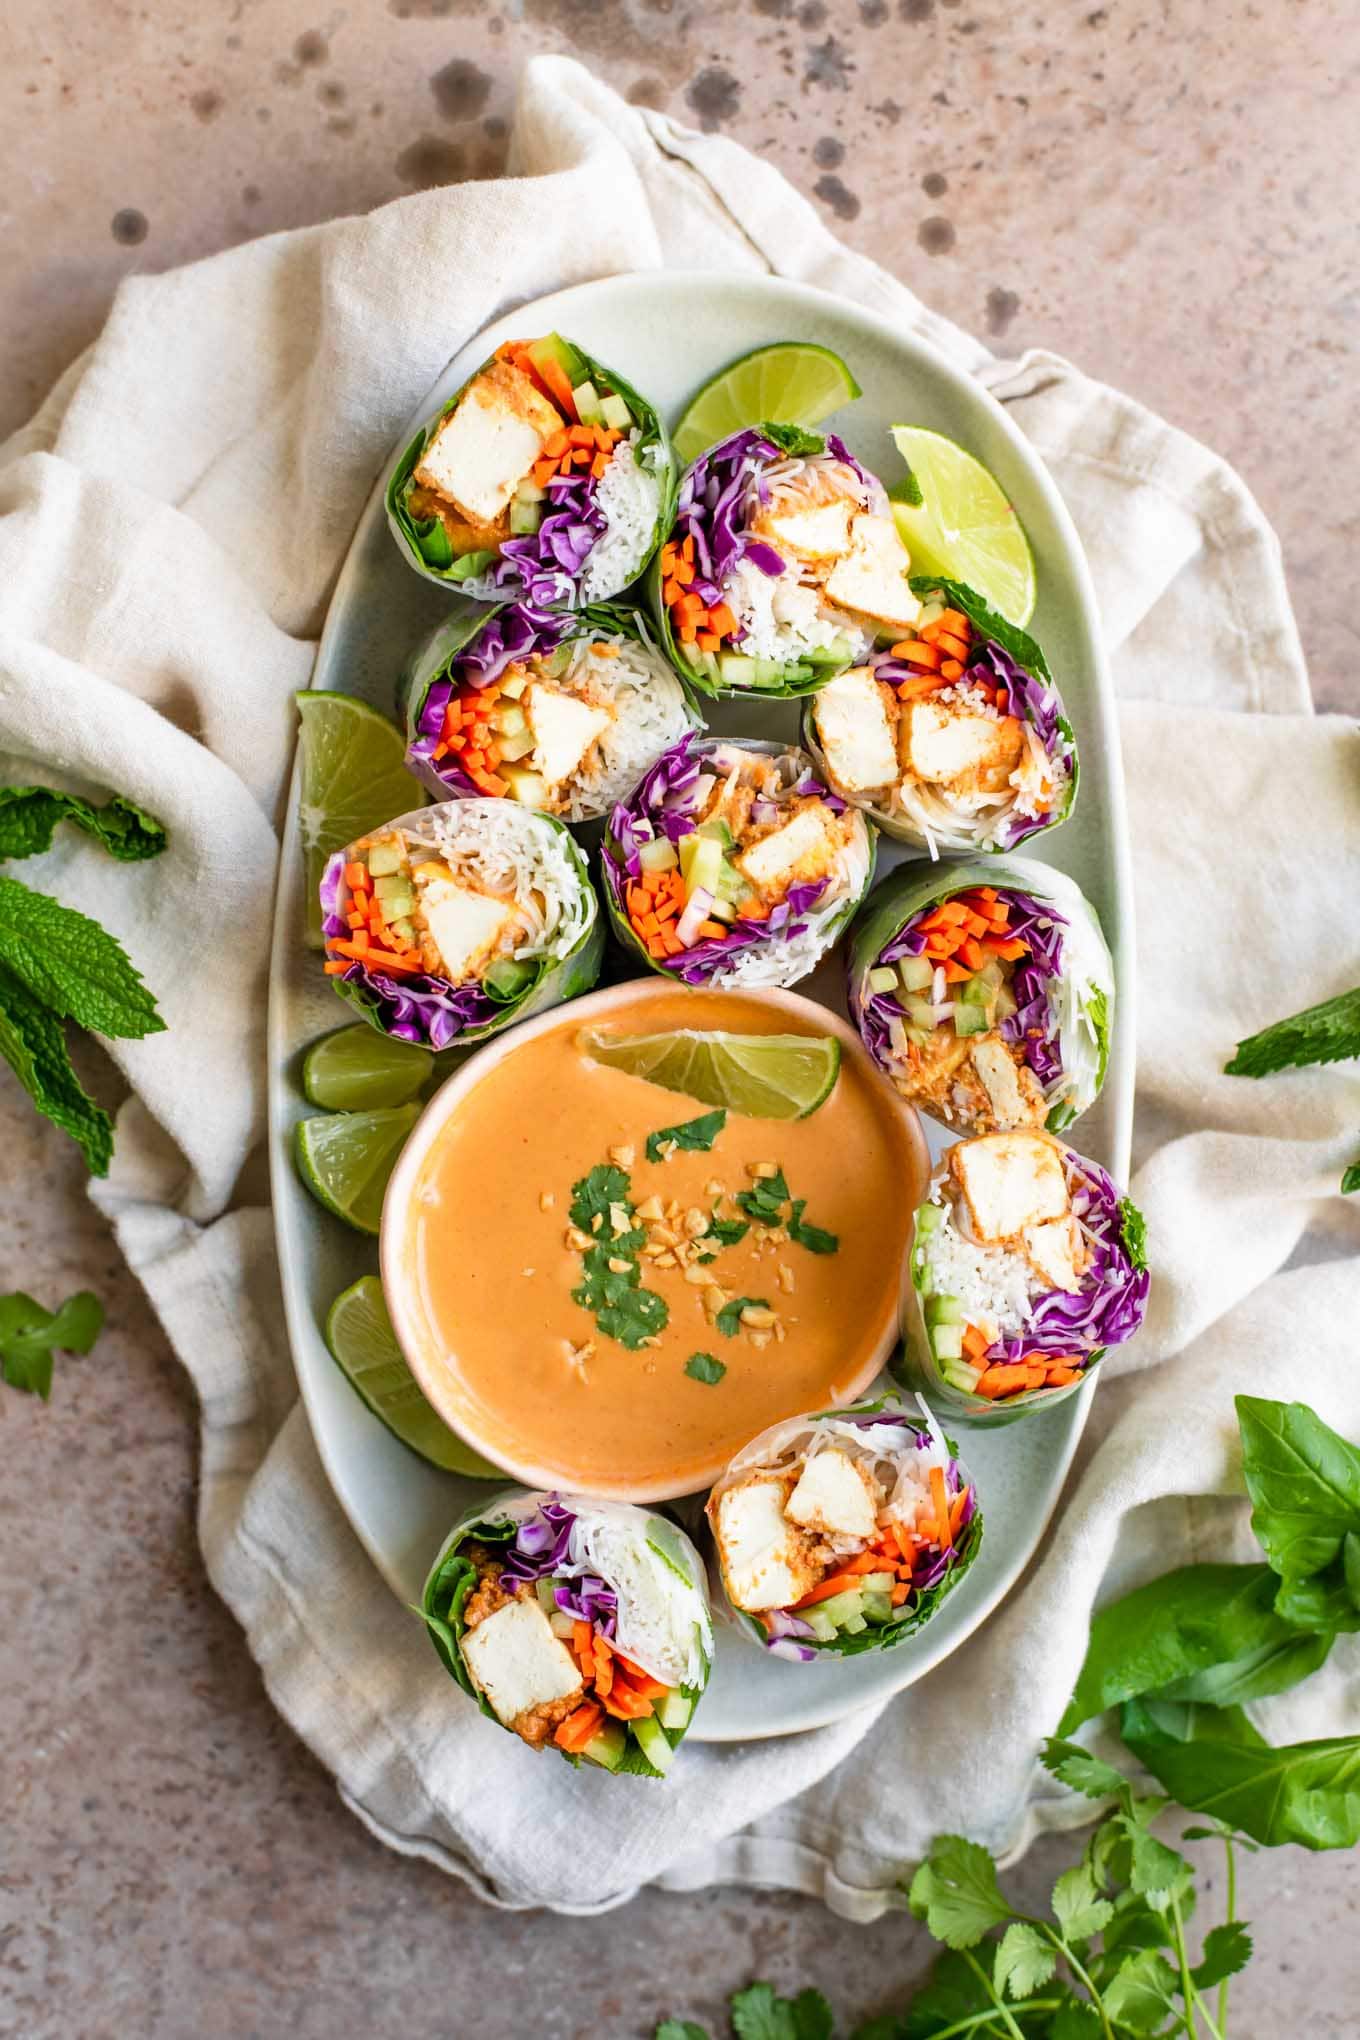 peanut tofu spring rolls cut in half and placed on a platter with lime wedges and a bowl of peanut sauce for dipping